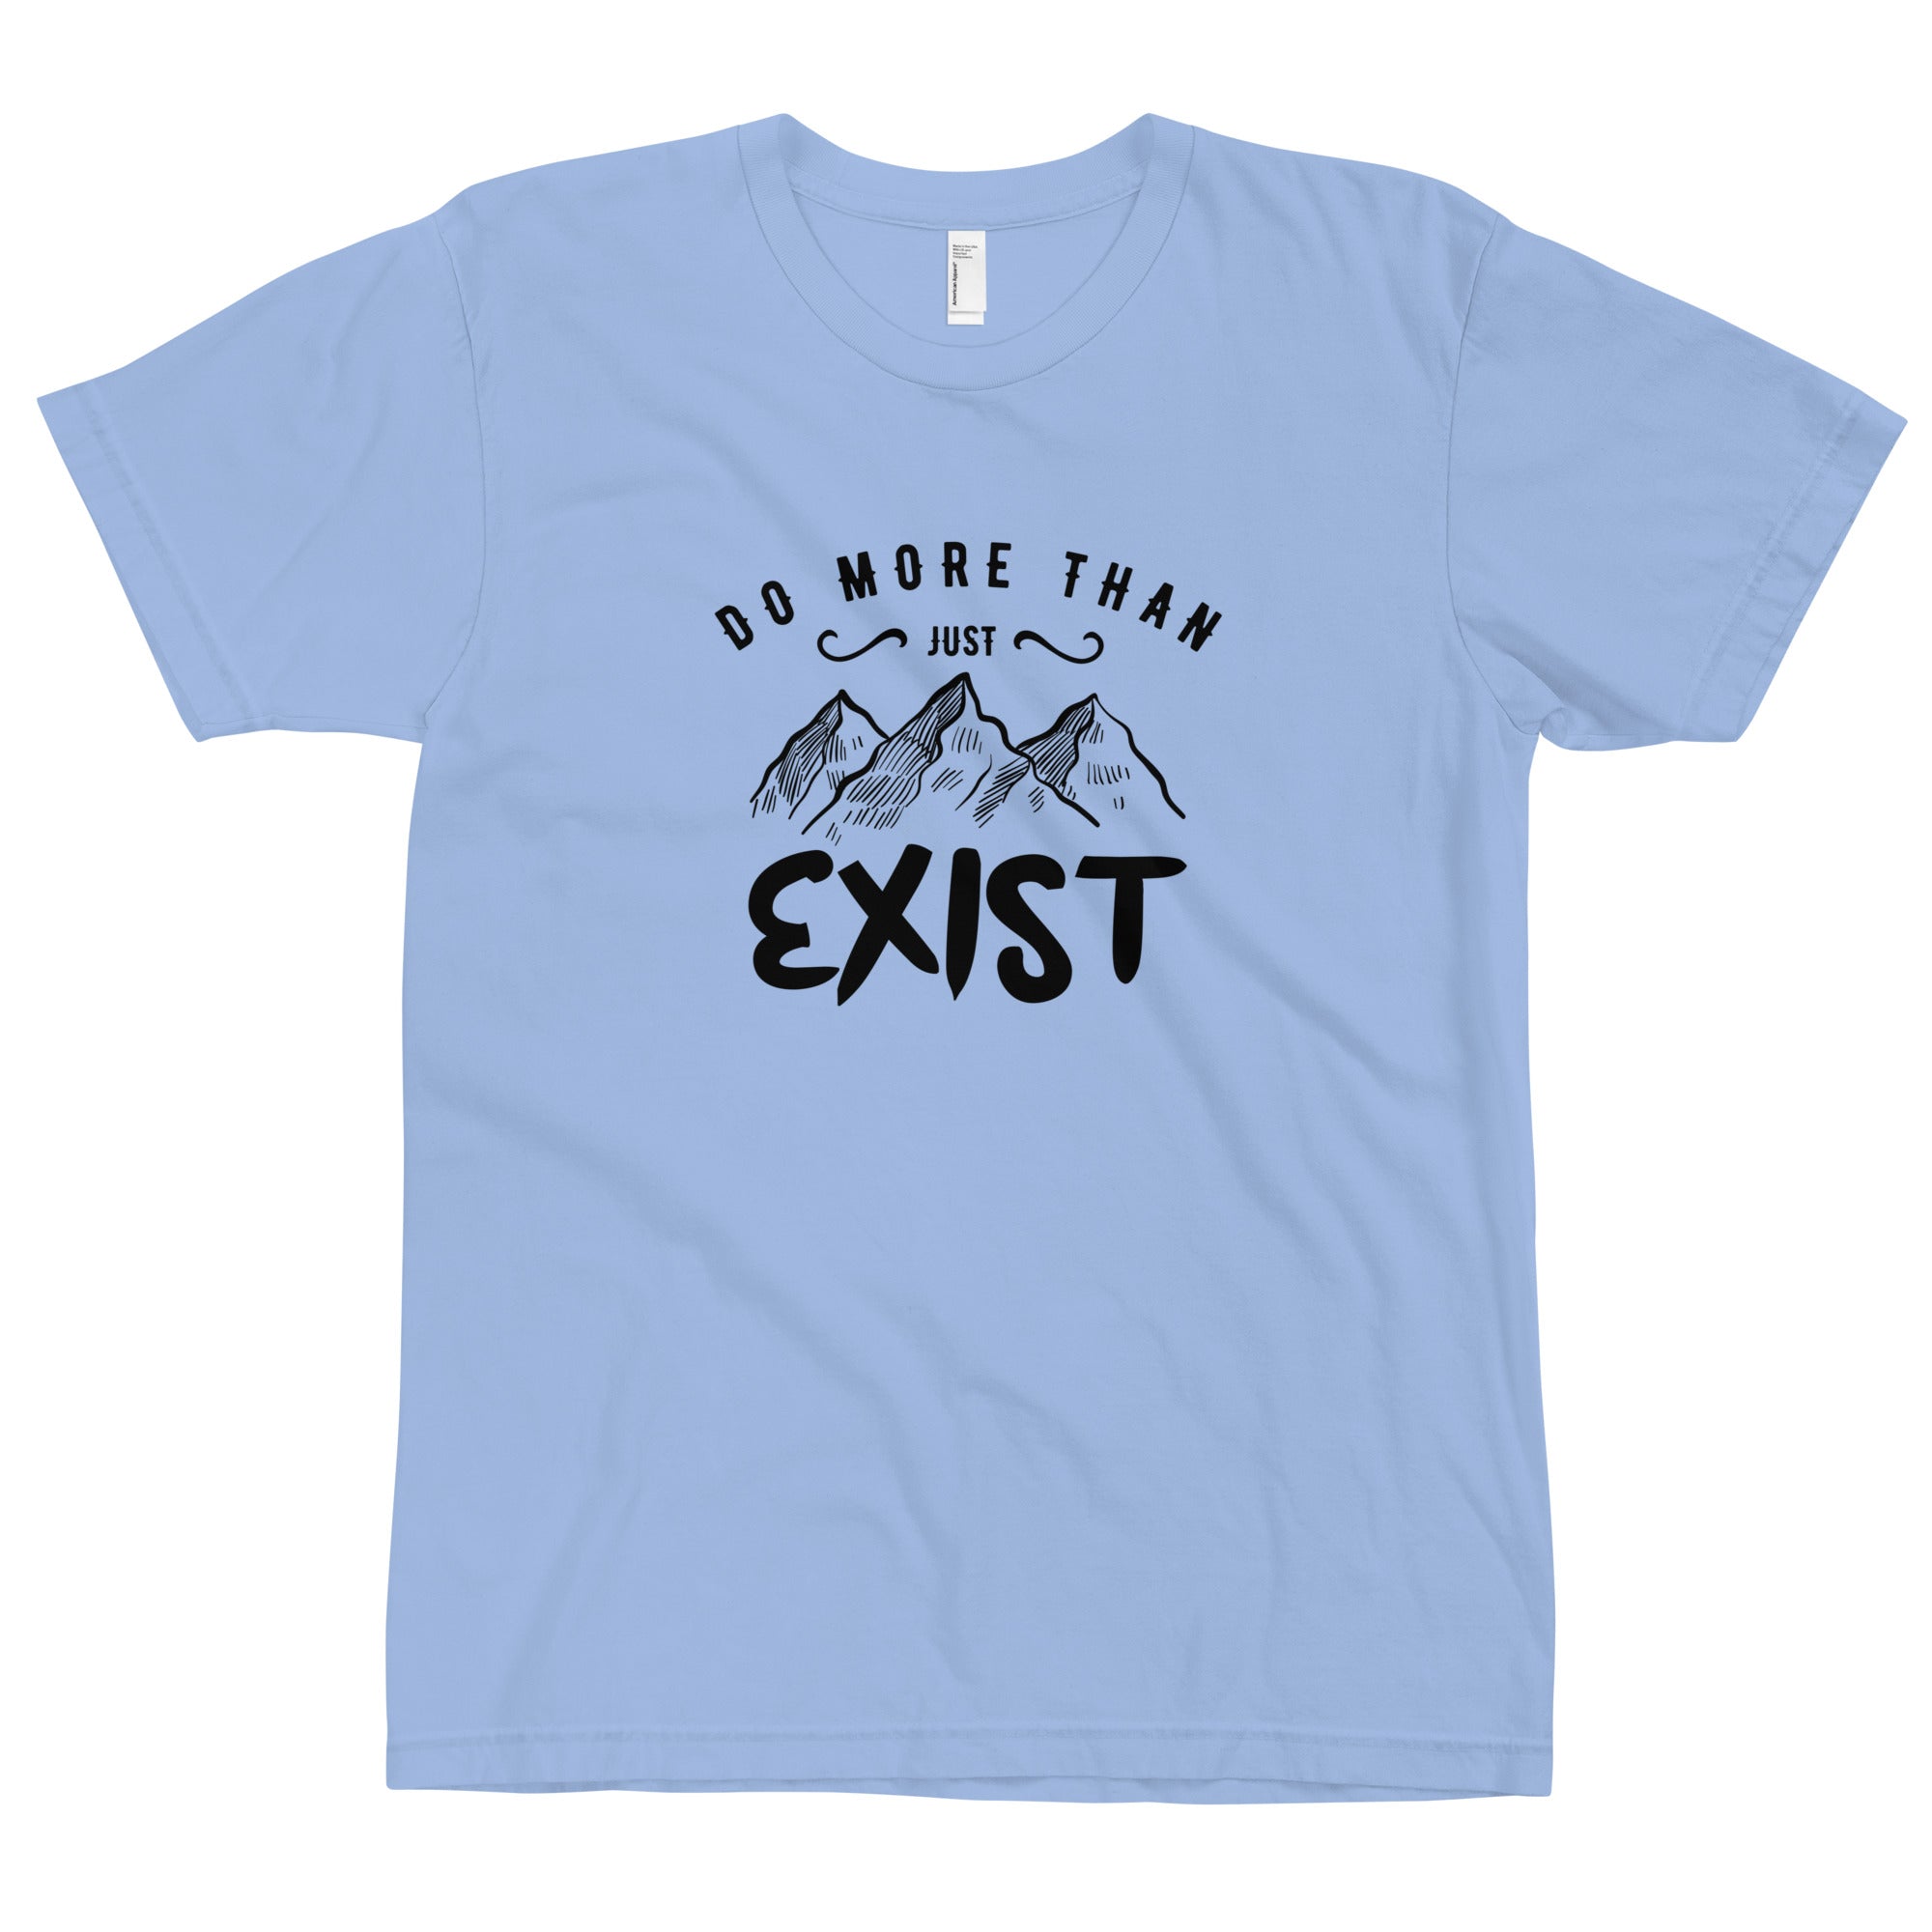 Do More Than Exist Unisex T-Shirt